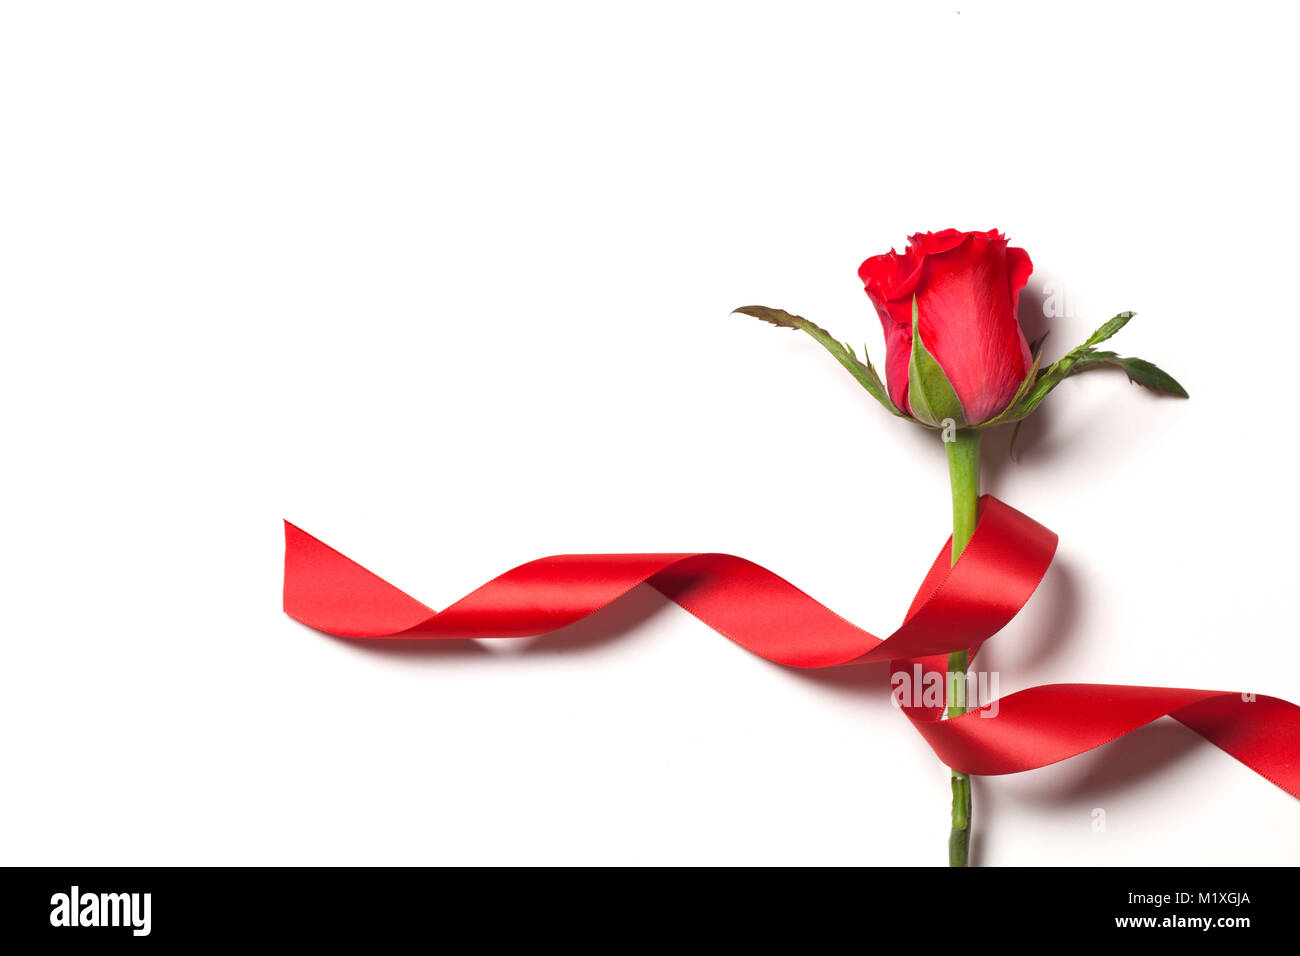 Single red rose on a plain white background with a red ribbon Stock Photo -  Alamy